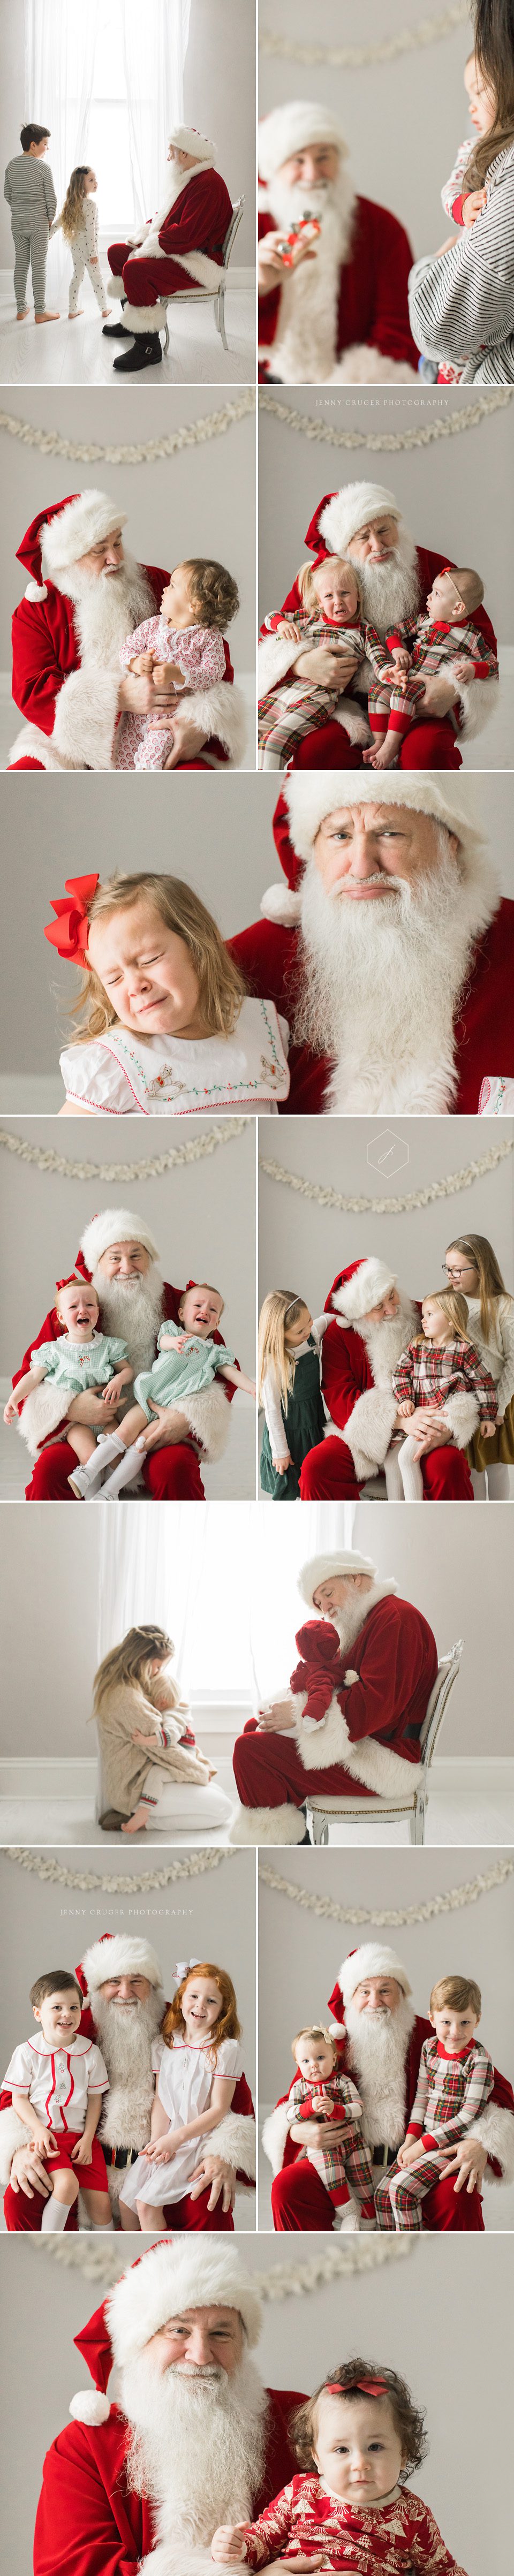 funny crying santa pictures